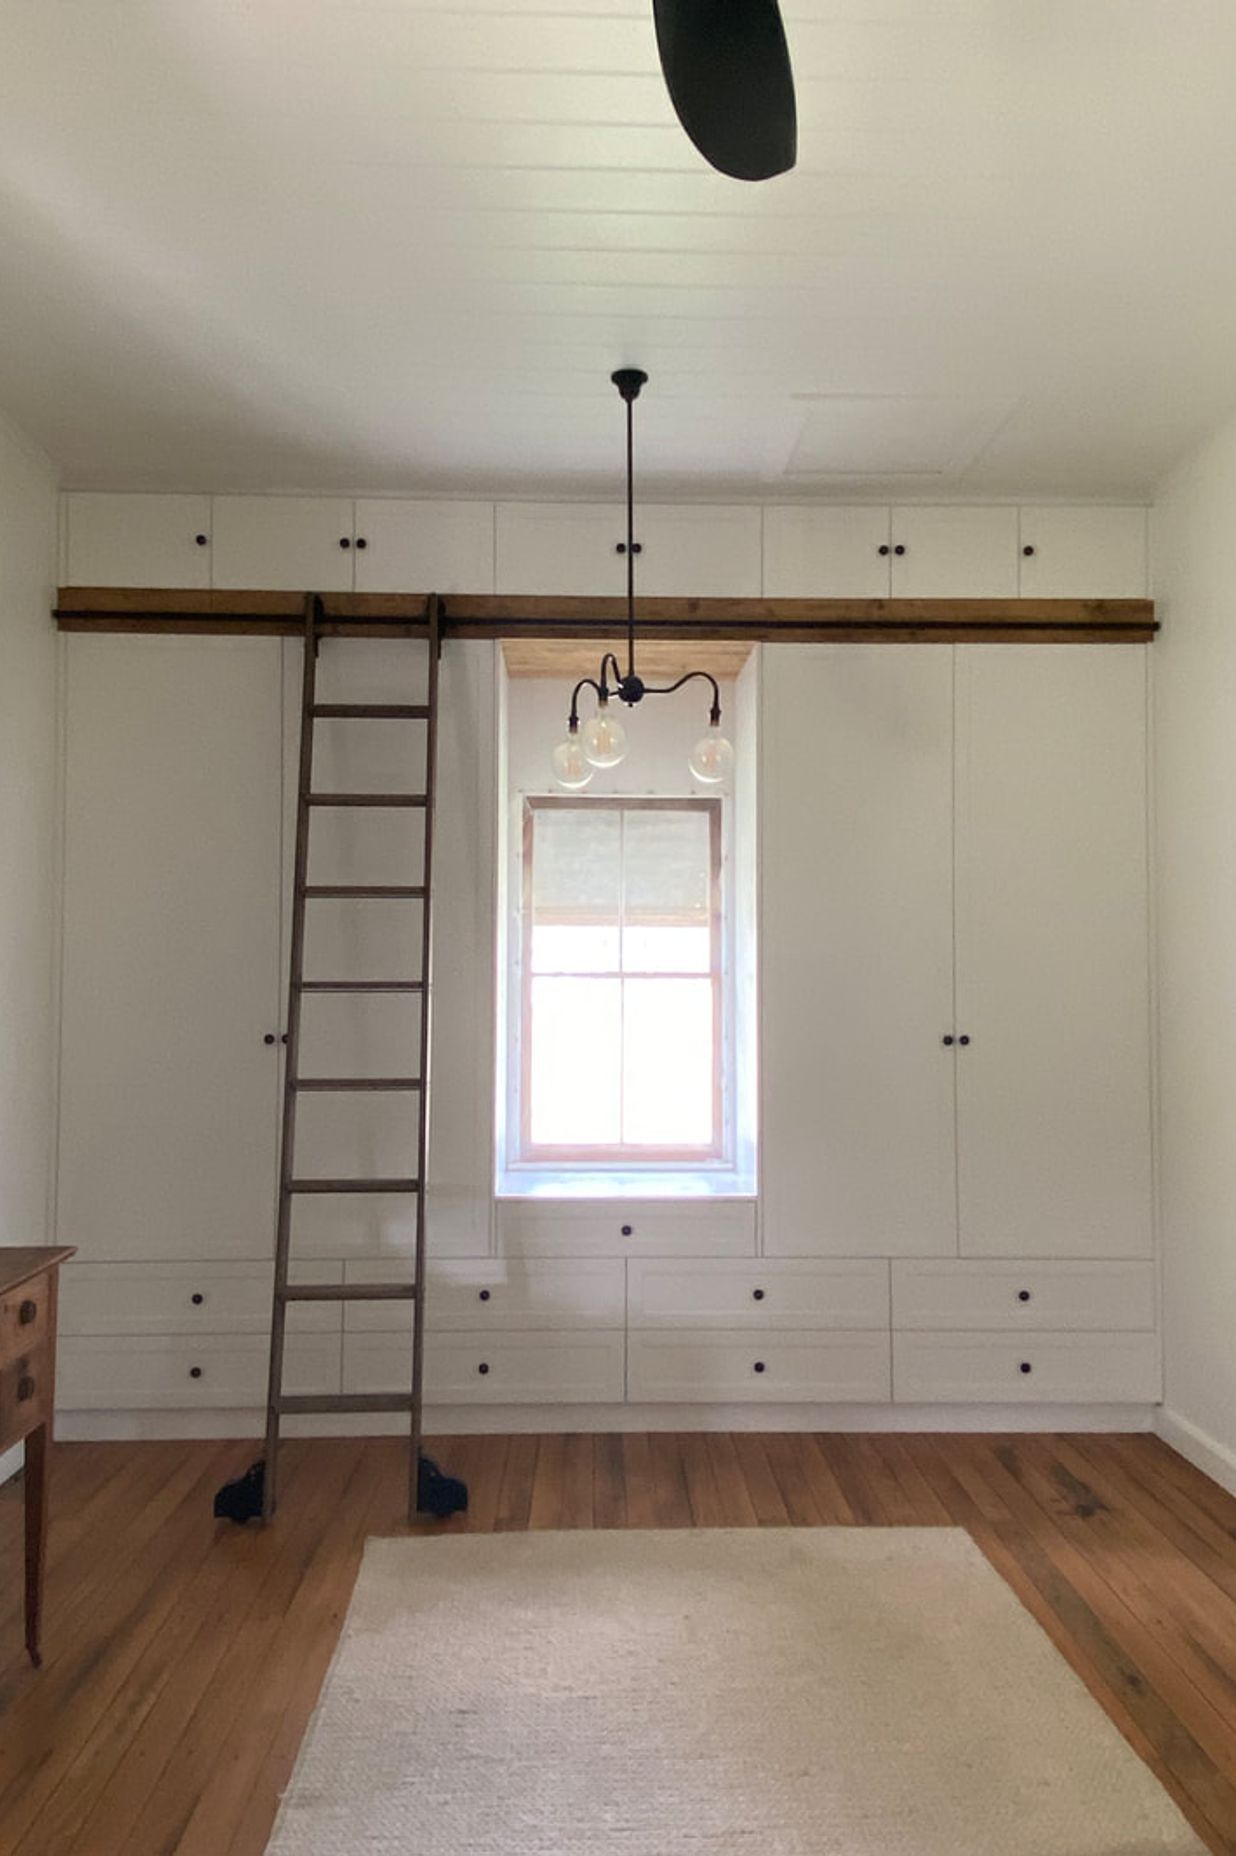 Ladders are ideal for accessing hard-to-reach storage.